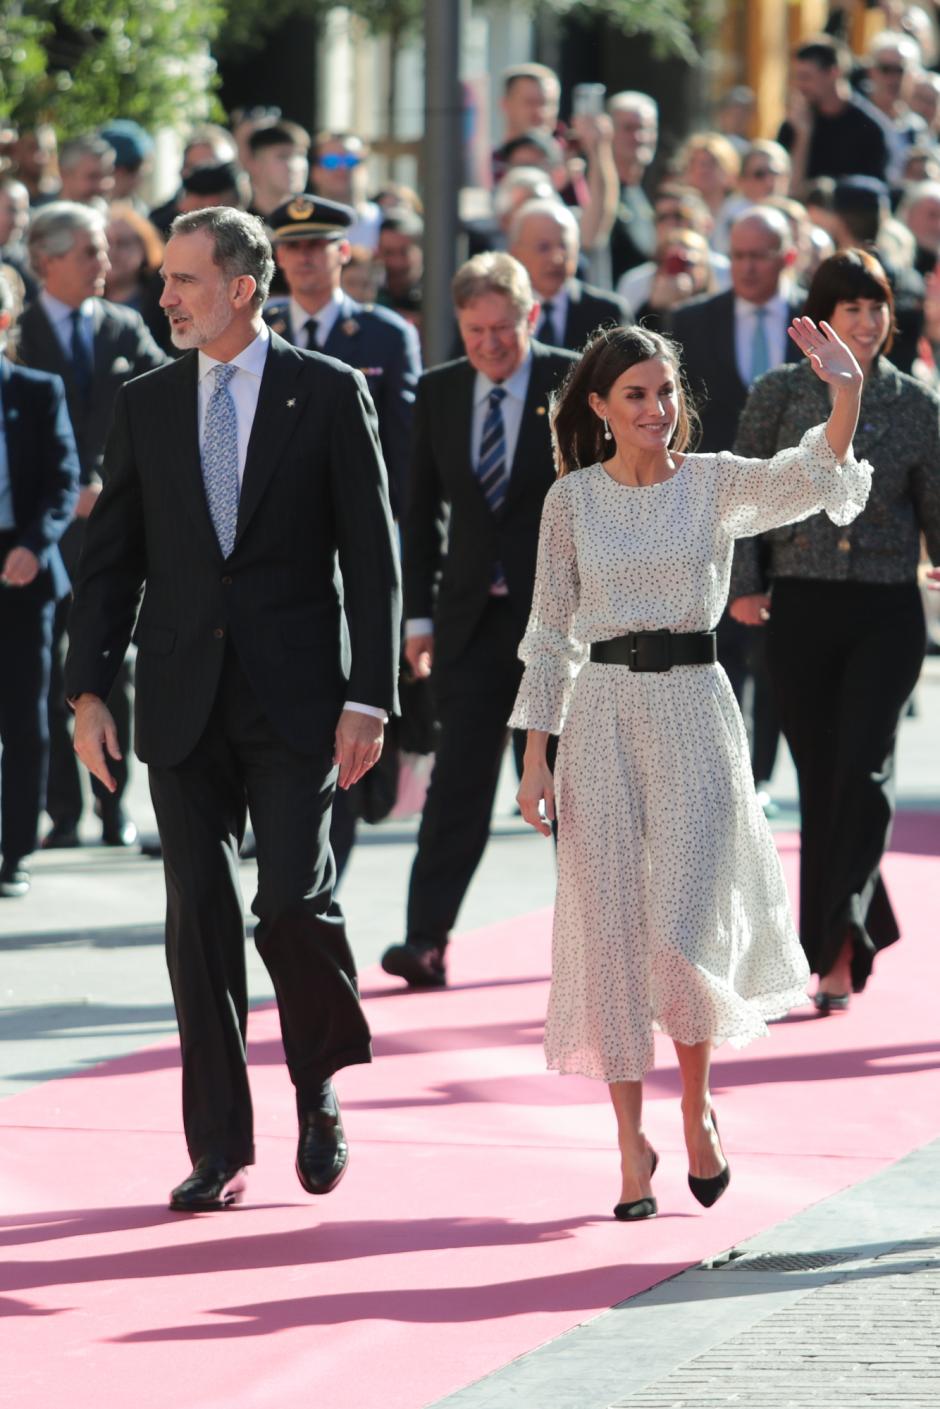 Spanish King Felipe VI and Queen Letizia attending the 34th Edition of the Rei Jaume I Awards in Valencia on Friday, 25 November 2022.